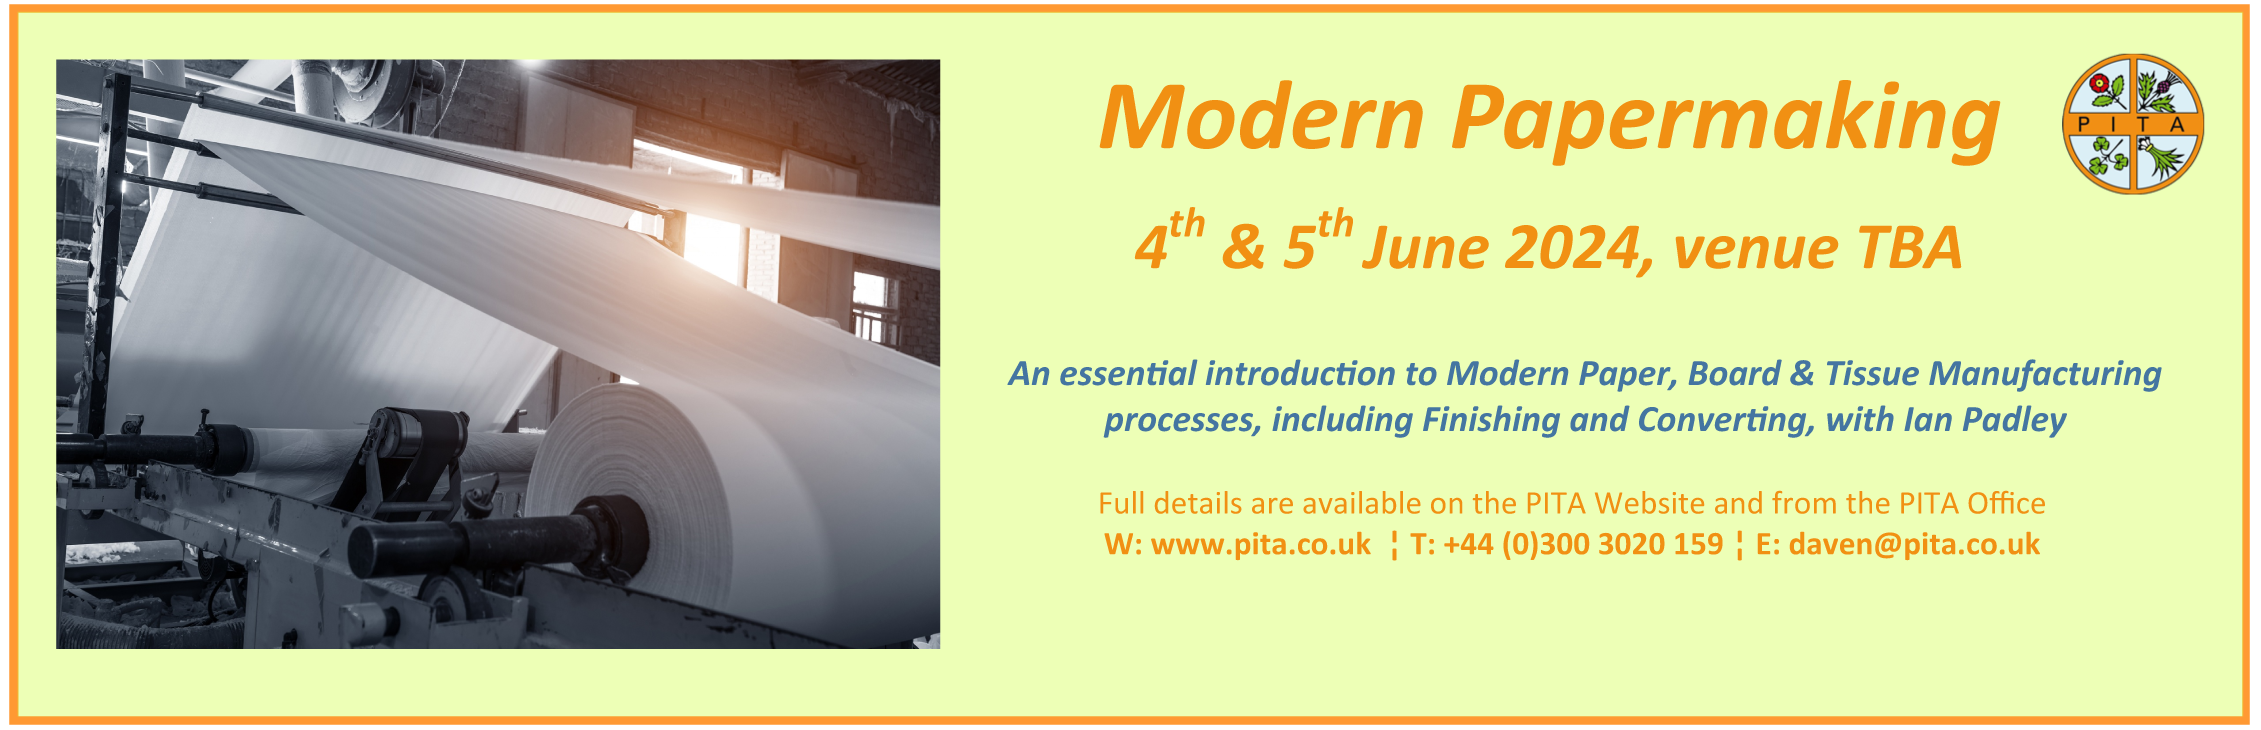 Modern Papermaking Course June 2024 new contact